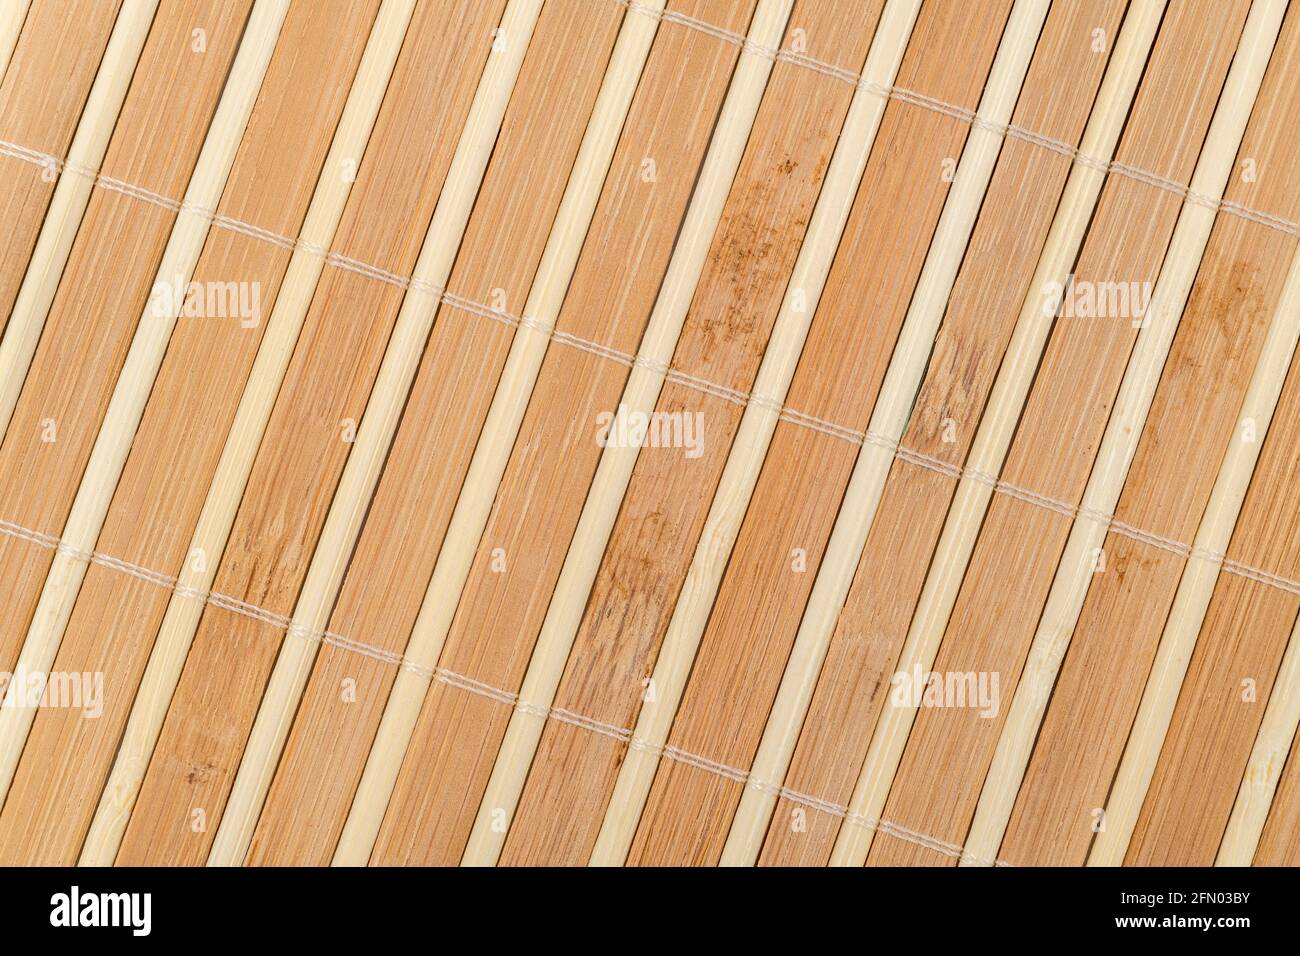 Close-up of simple eco-friendly bamboo table mat / placemat texture.  For sustainable wood products / forest products. Stock Photo